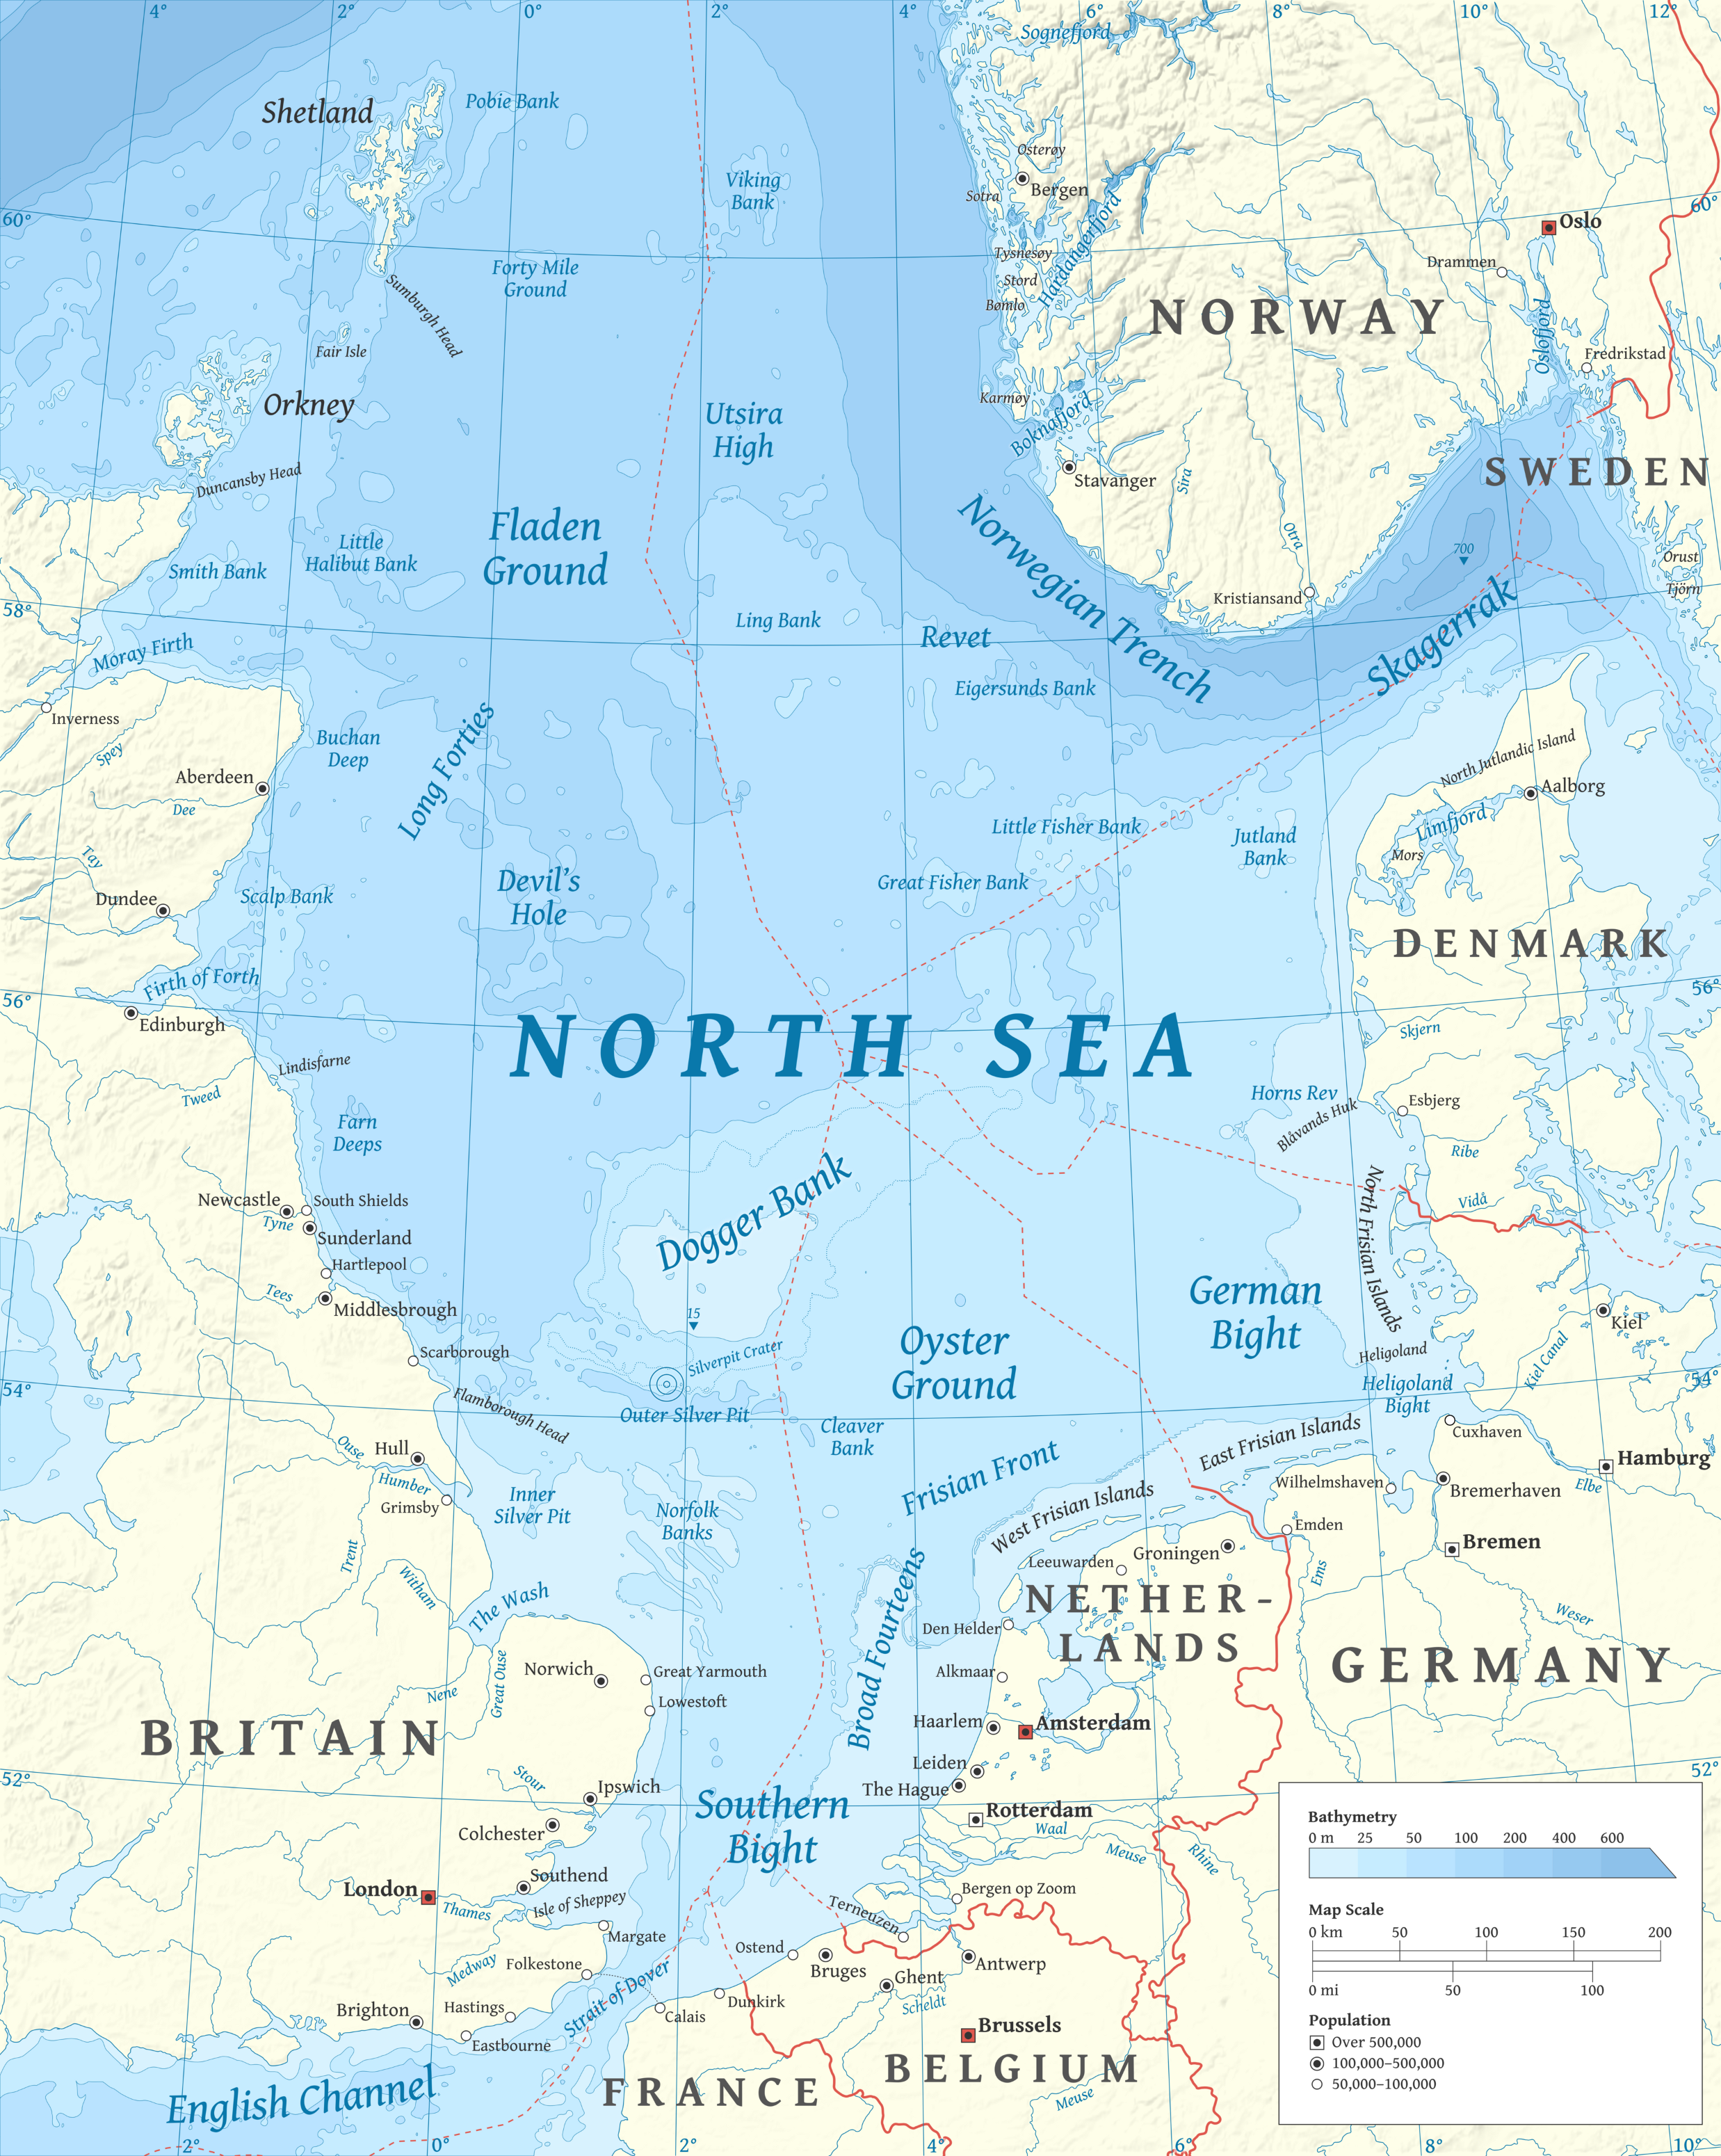 File:North Sea map-en.png - Wikimedia Commons